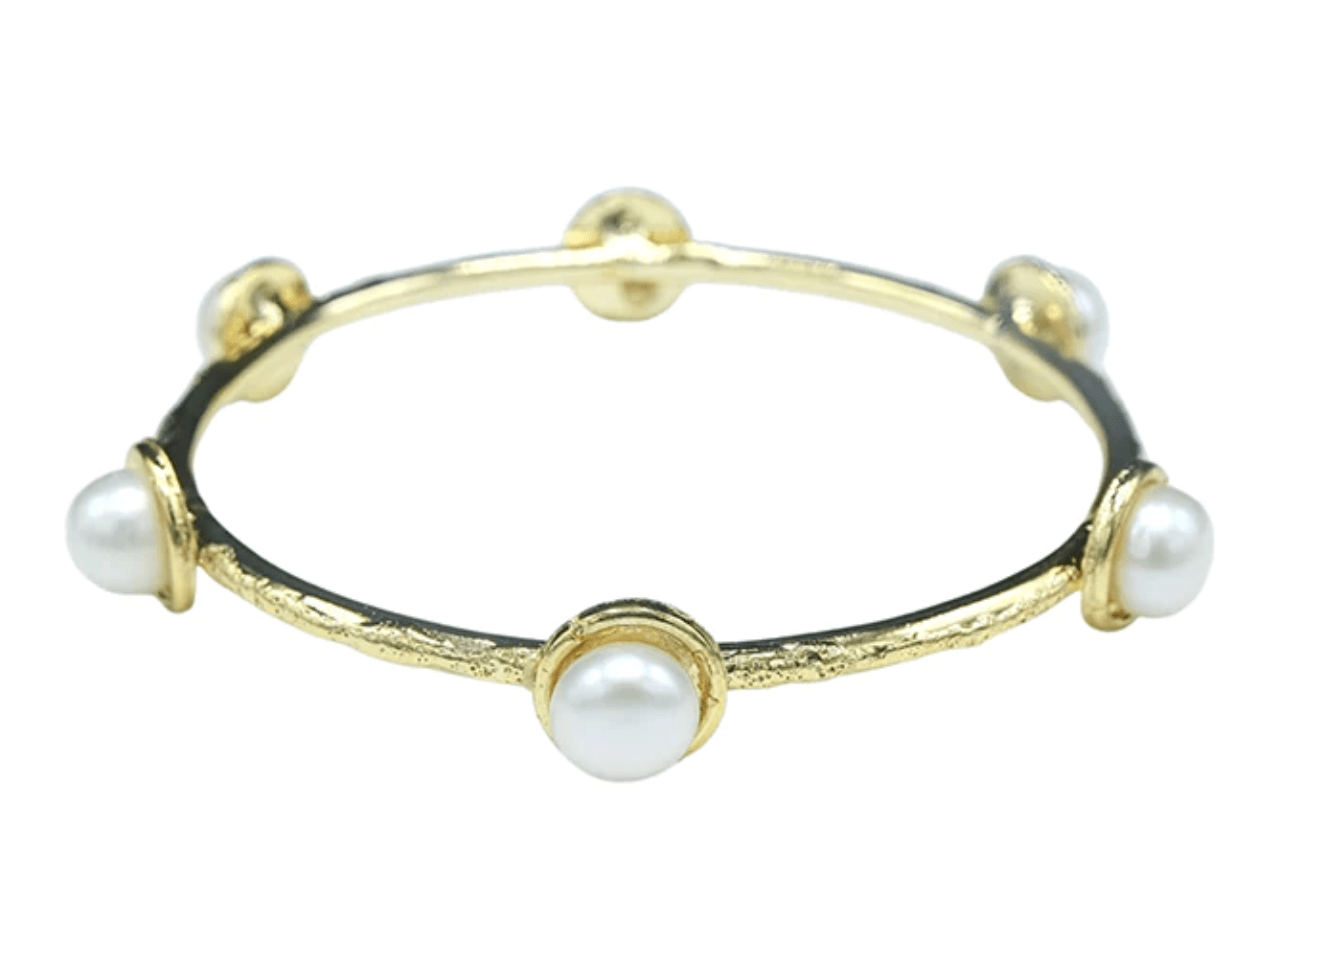 Pearl Hammered Gold Bangle with 6 Pearls - The French Shoppe